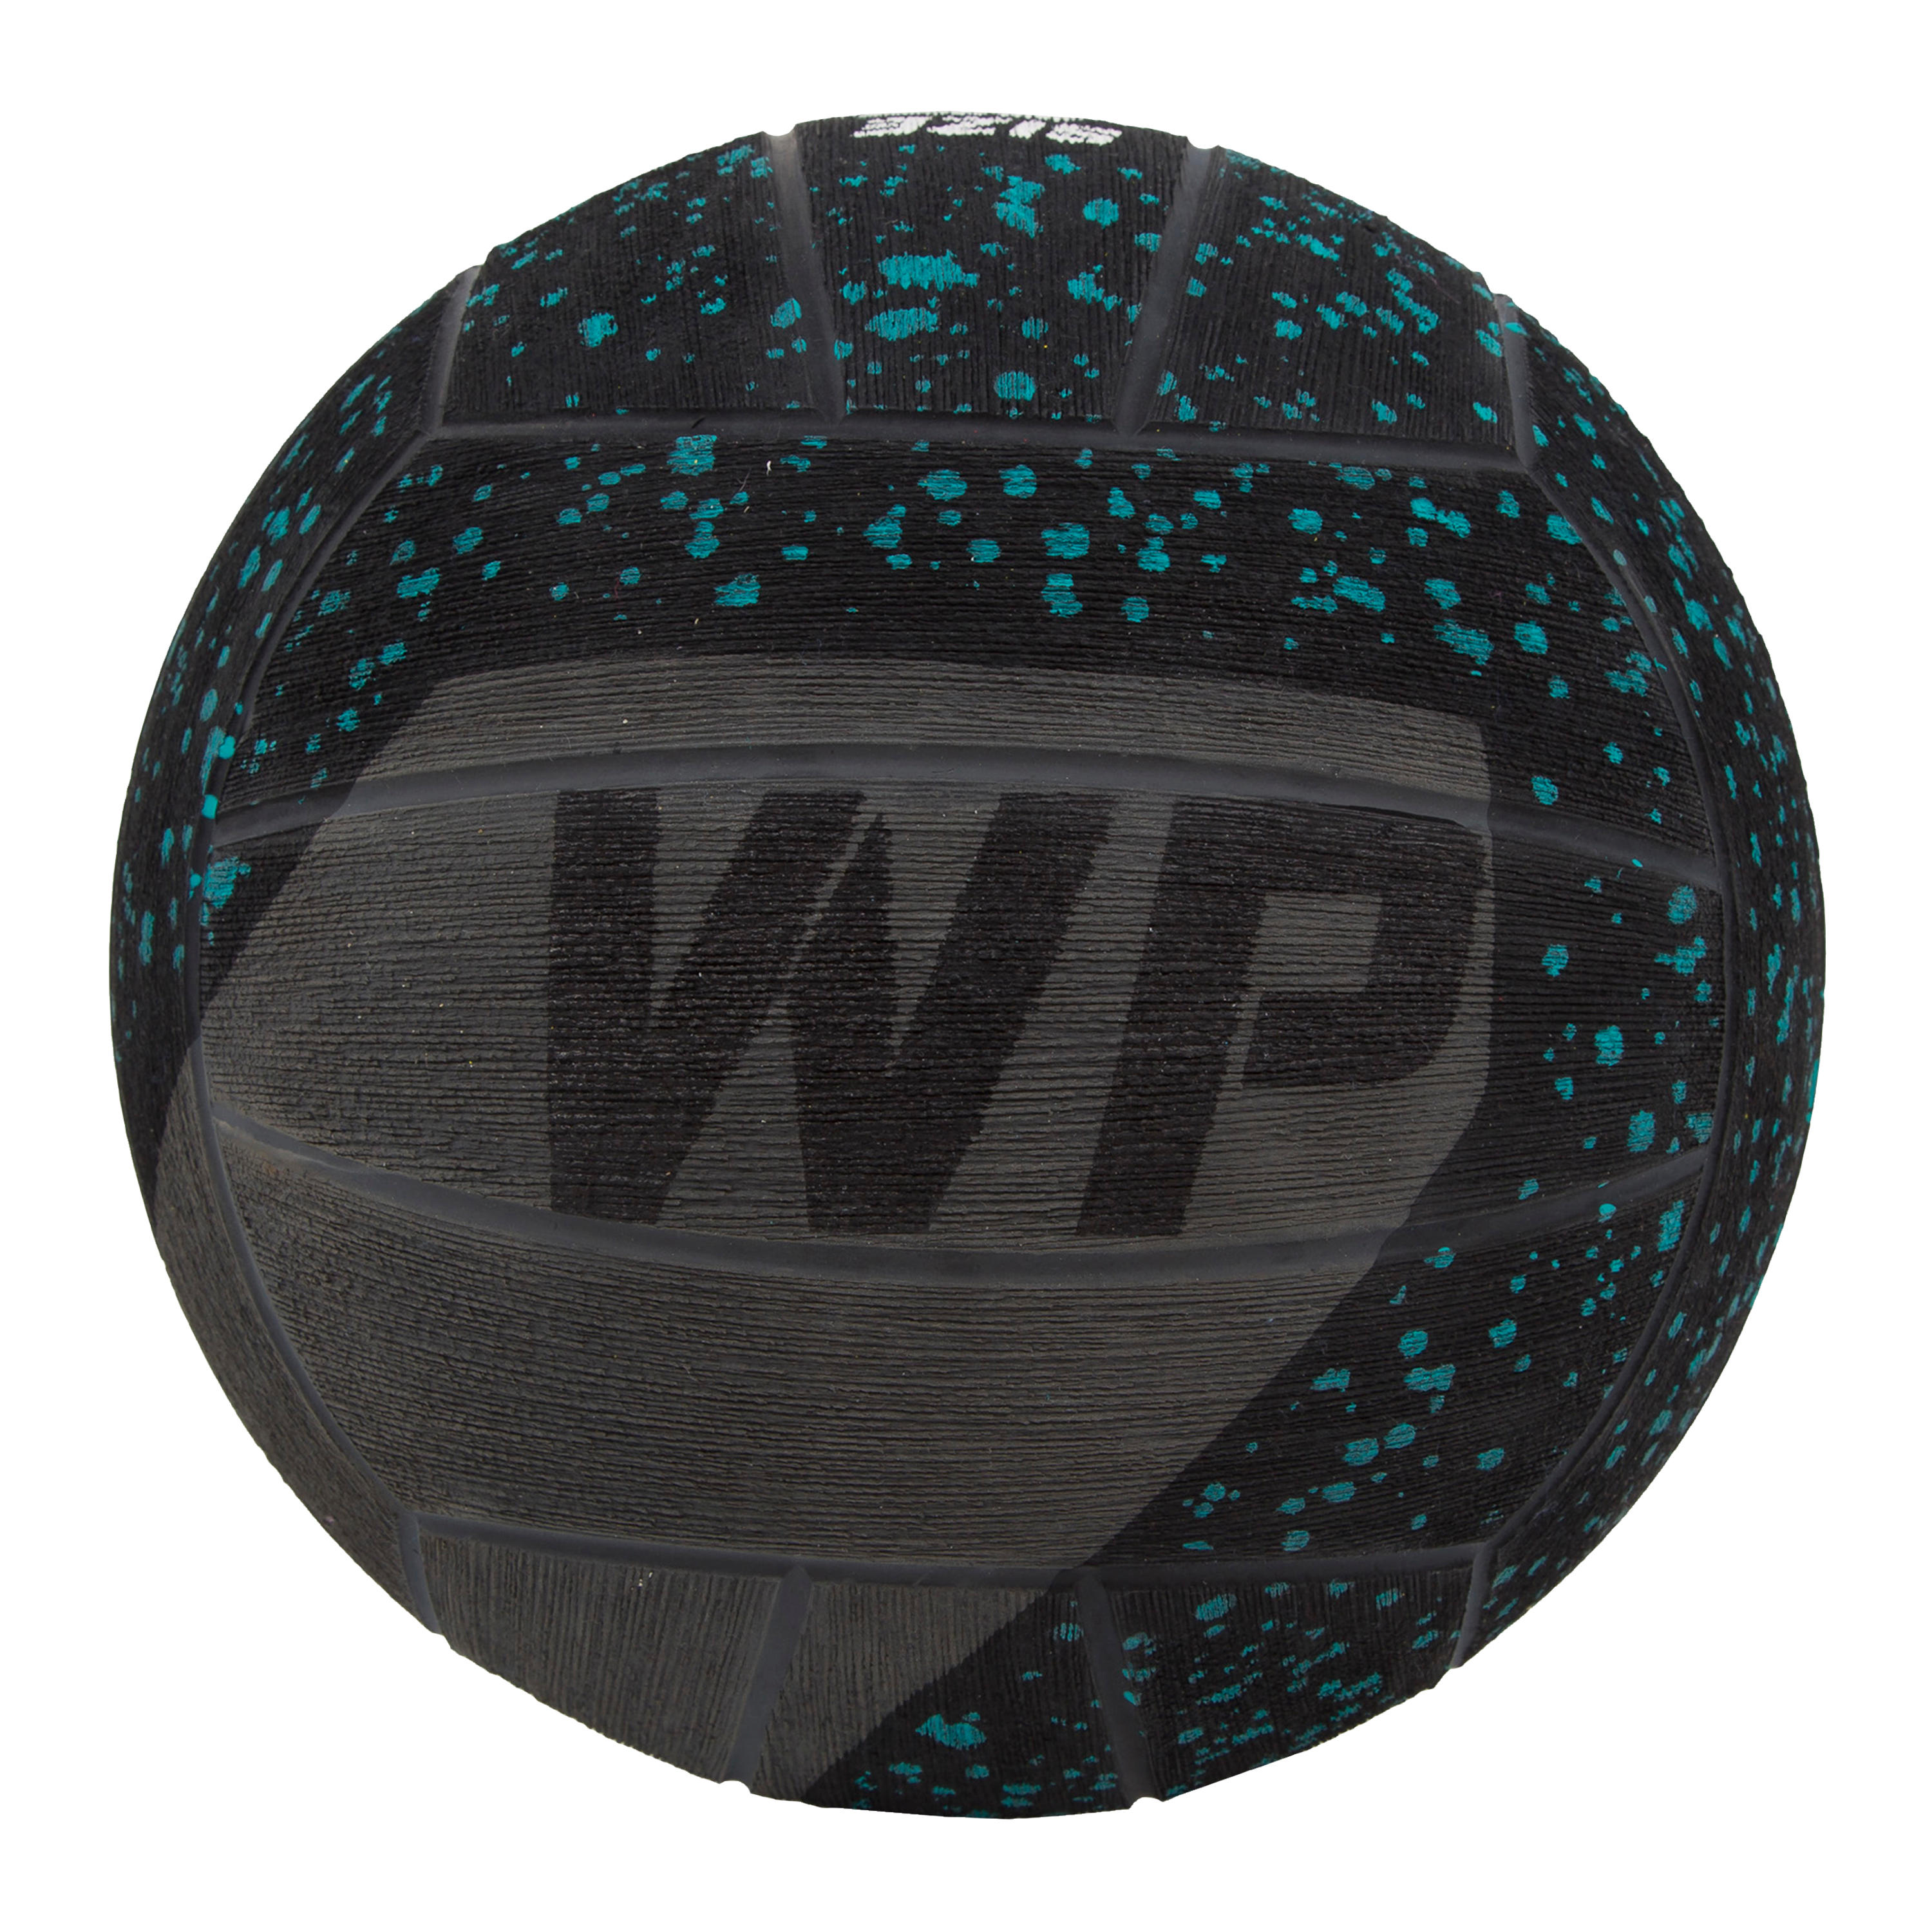 WEIGHTED WATER POLO BALL WP500 1KG SIZE 5 4/6